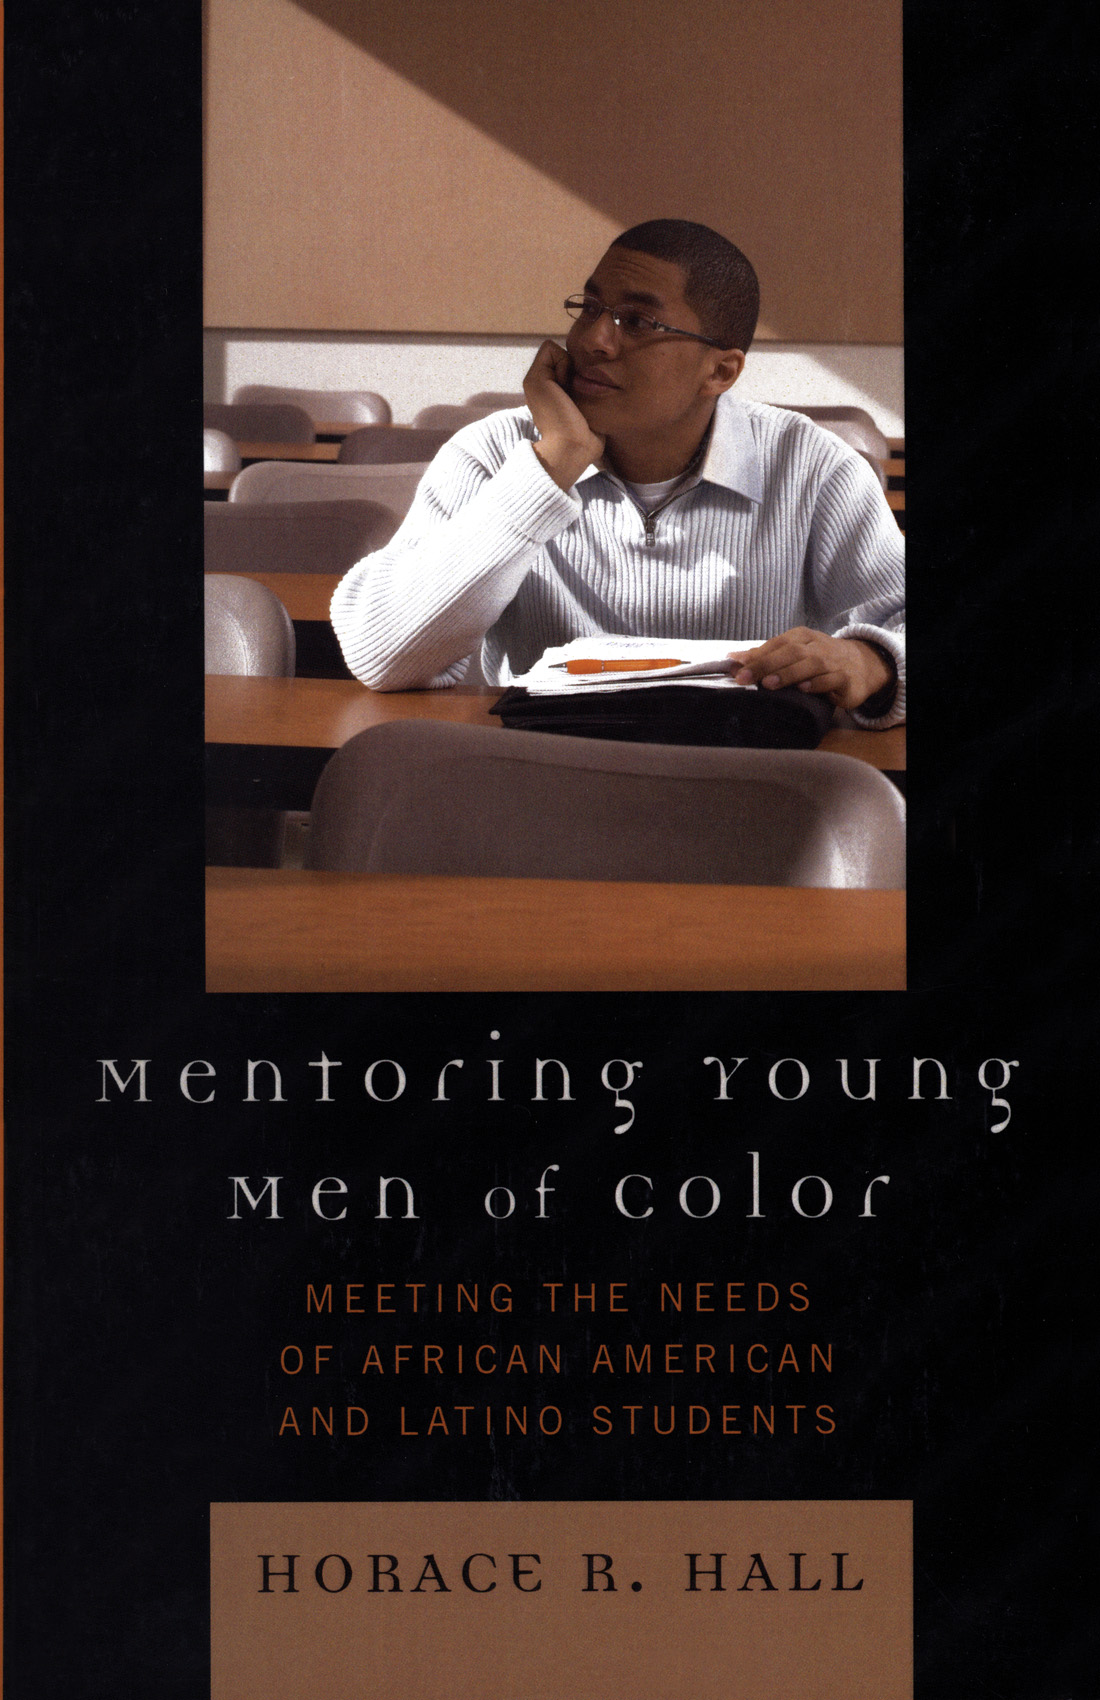 Mentoring Young Men of Color: Meeting the Needs of African American and Latino Students